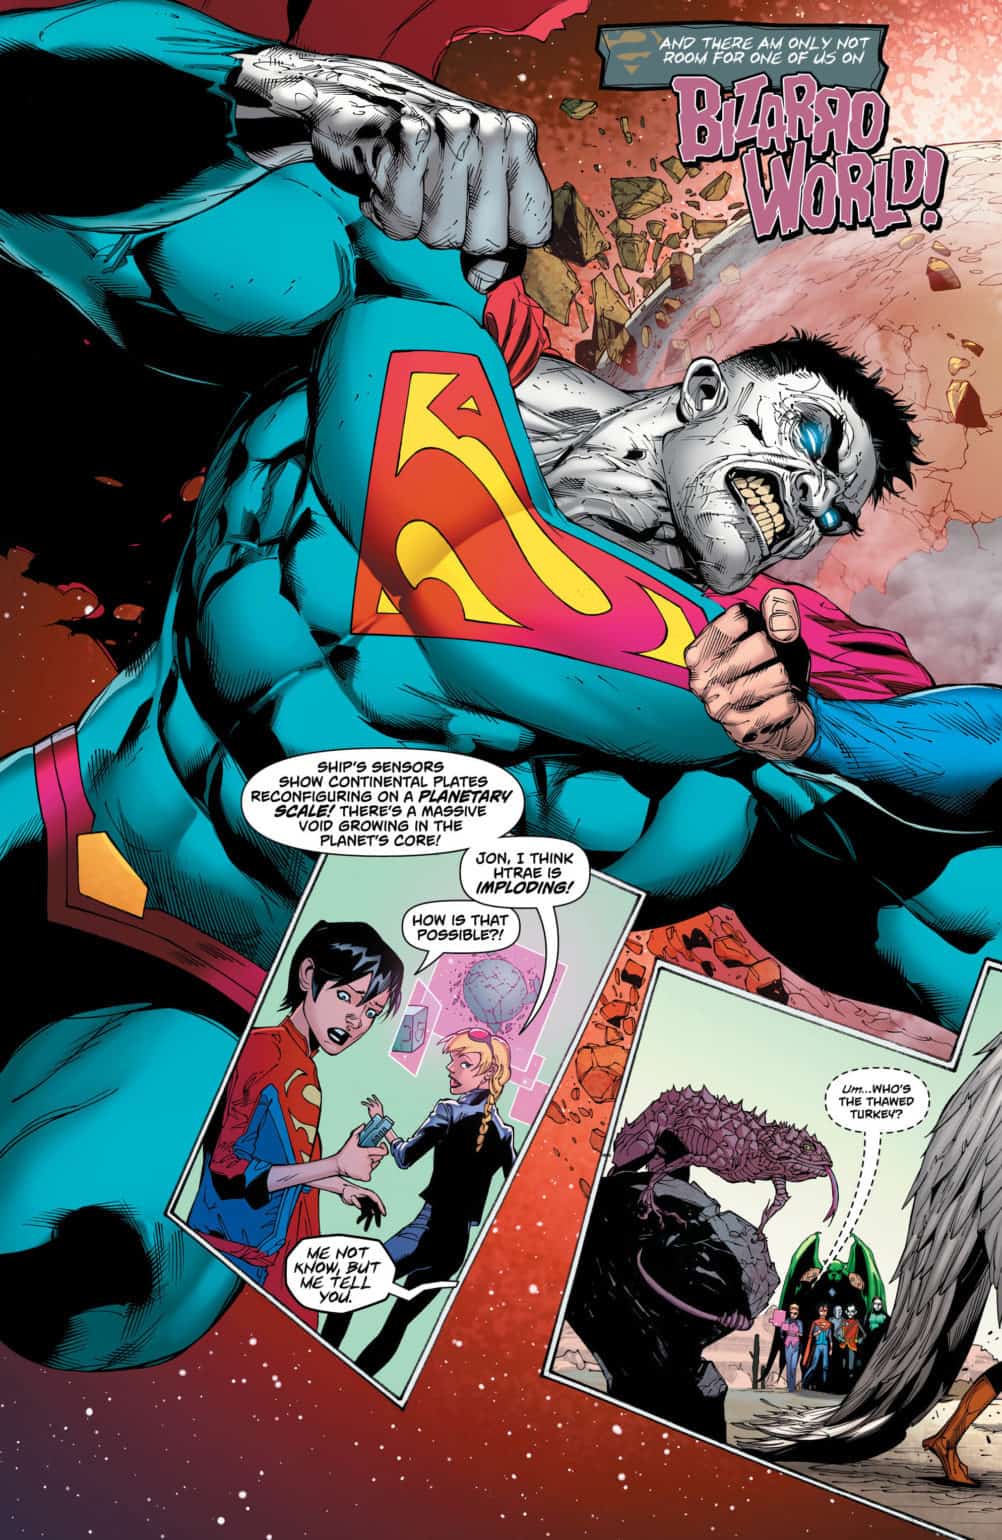 Exclusive Preview: SUPERMAN #44